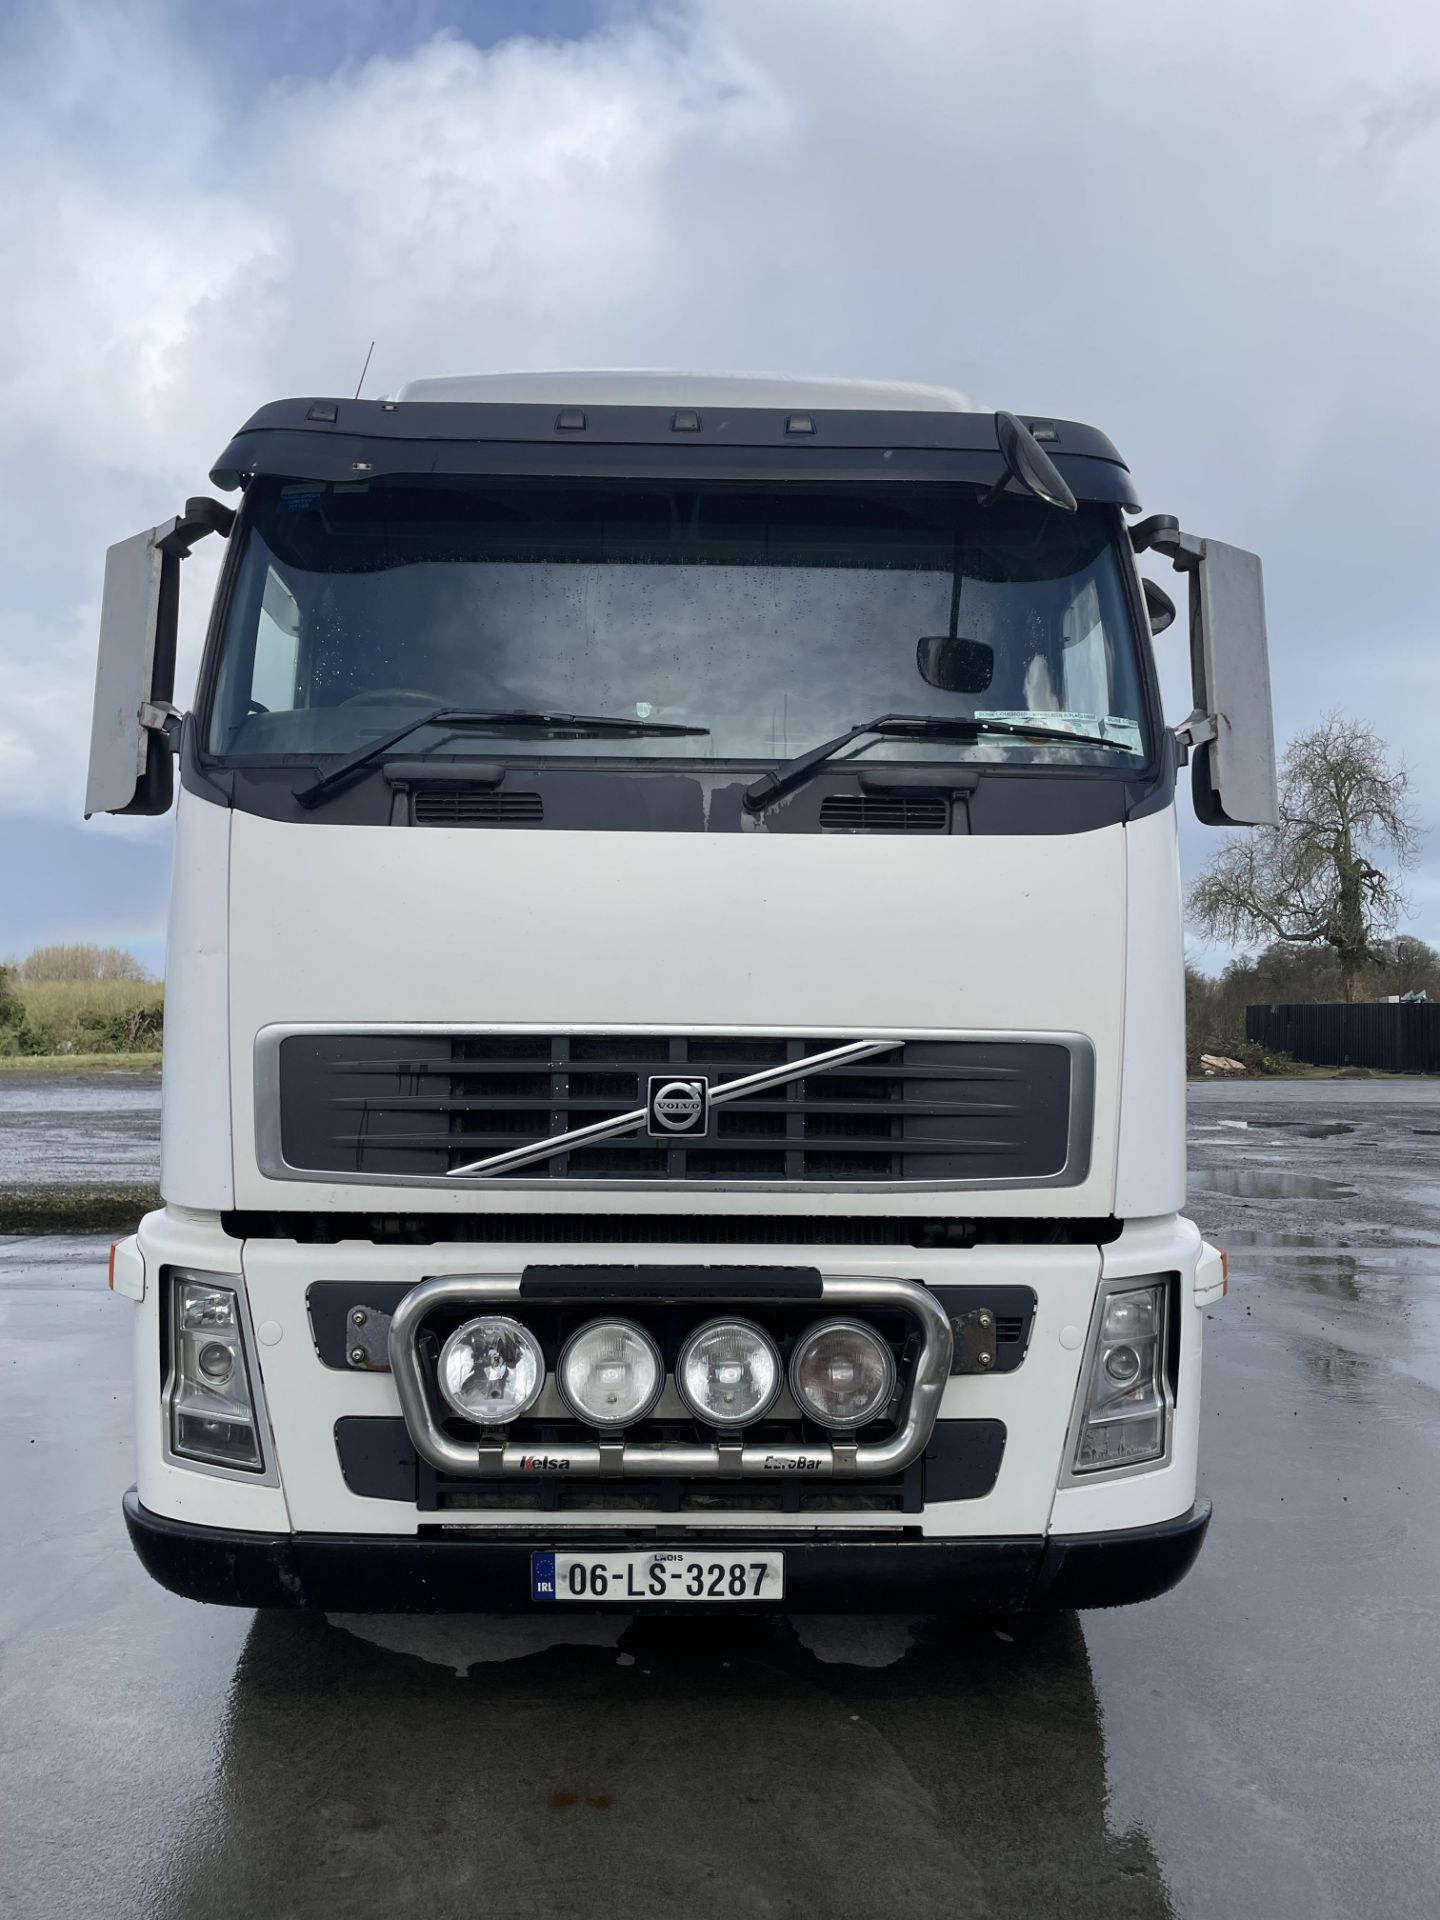 VOLVO ARTICULATED TRACTOR UNIT - REG 06 LS 3287